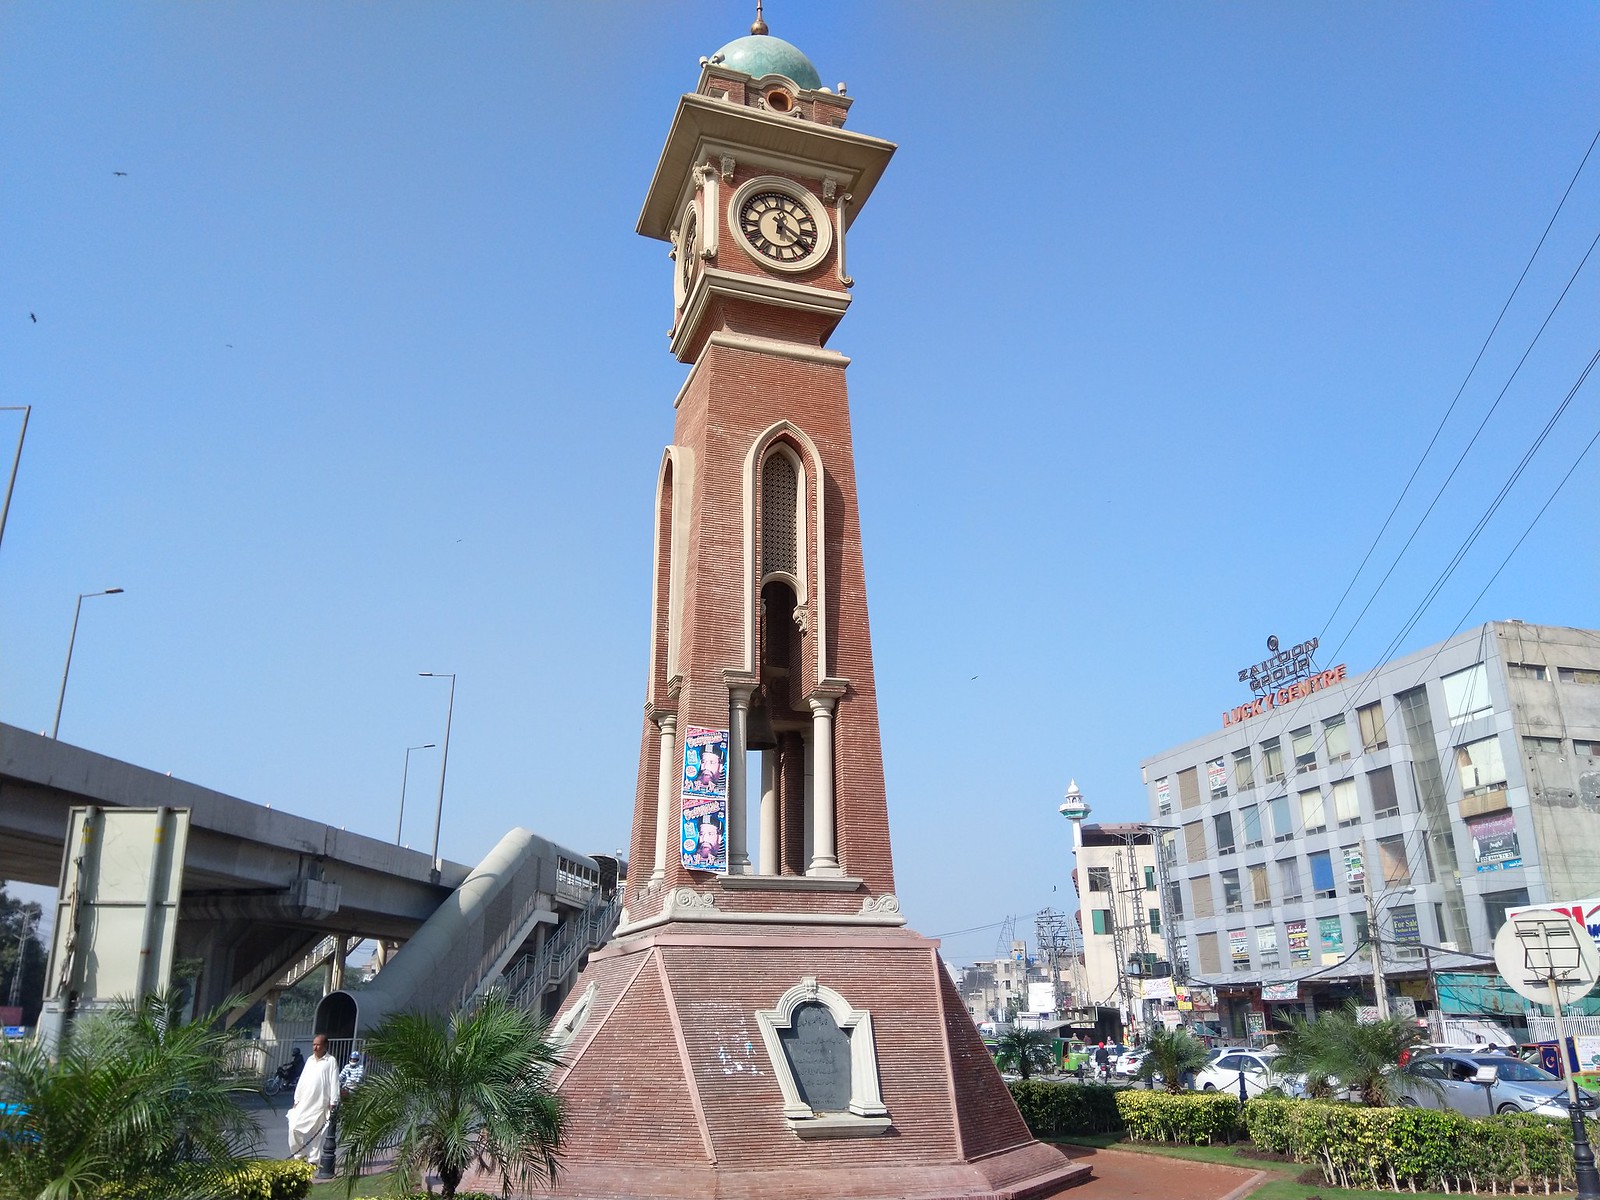 Picture of Clock Tower with Auto Mode on Nokia 6.1 Plus